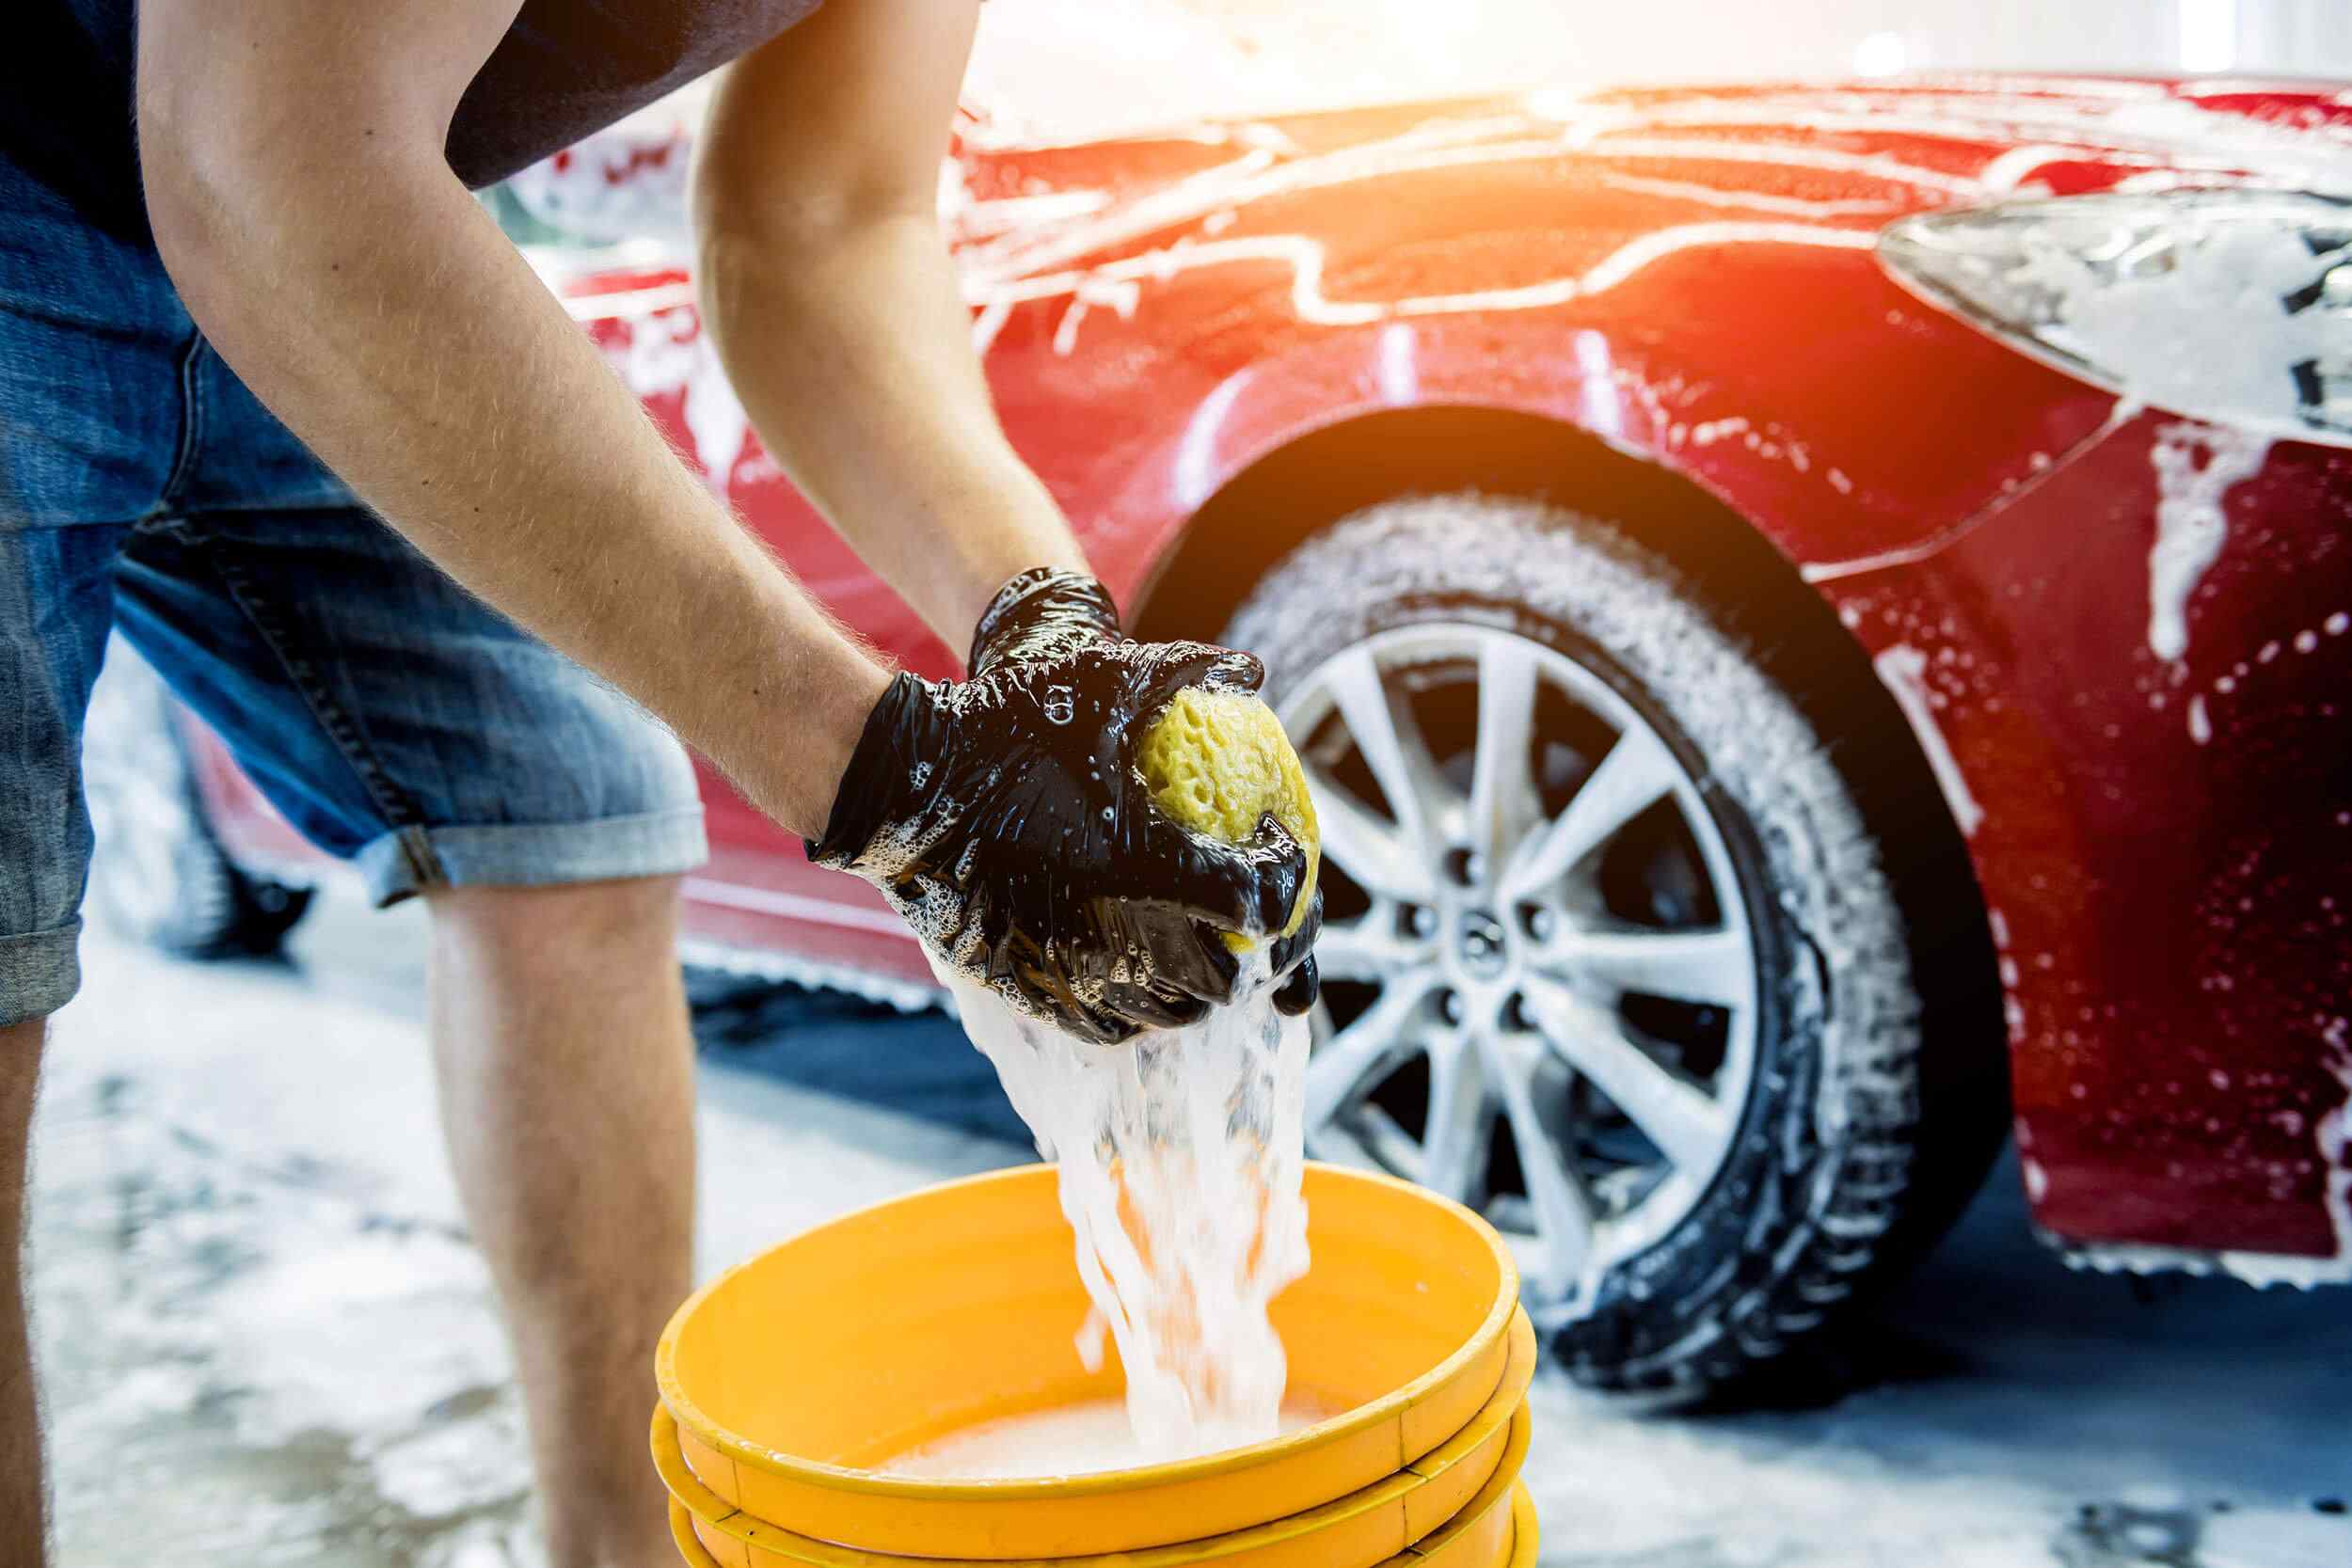 Car washing: How do I adore thee!